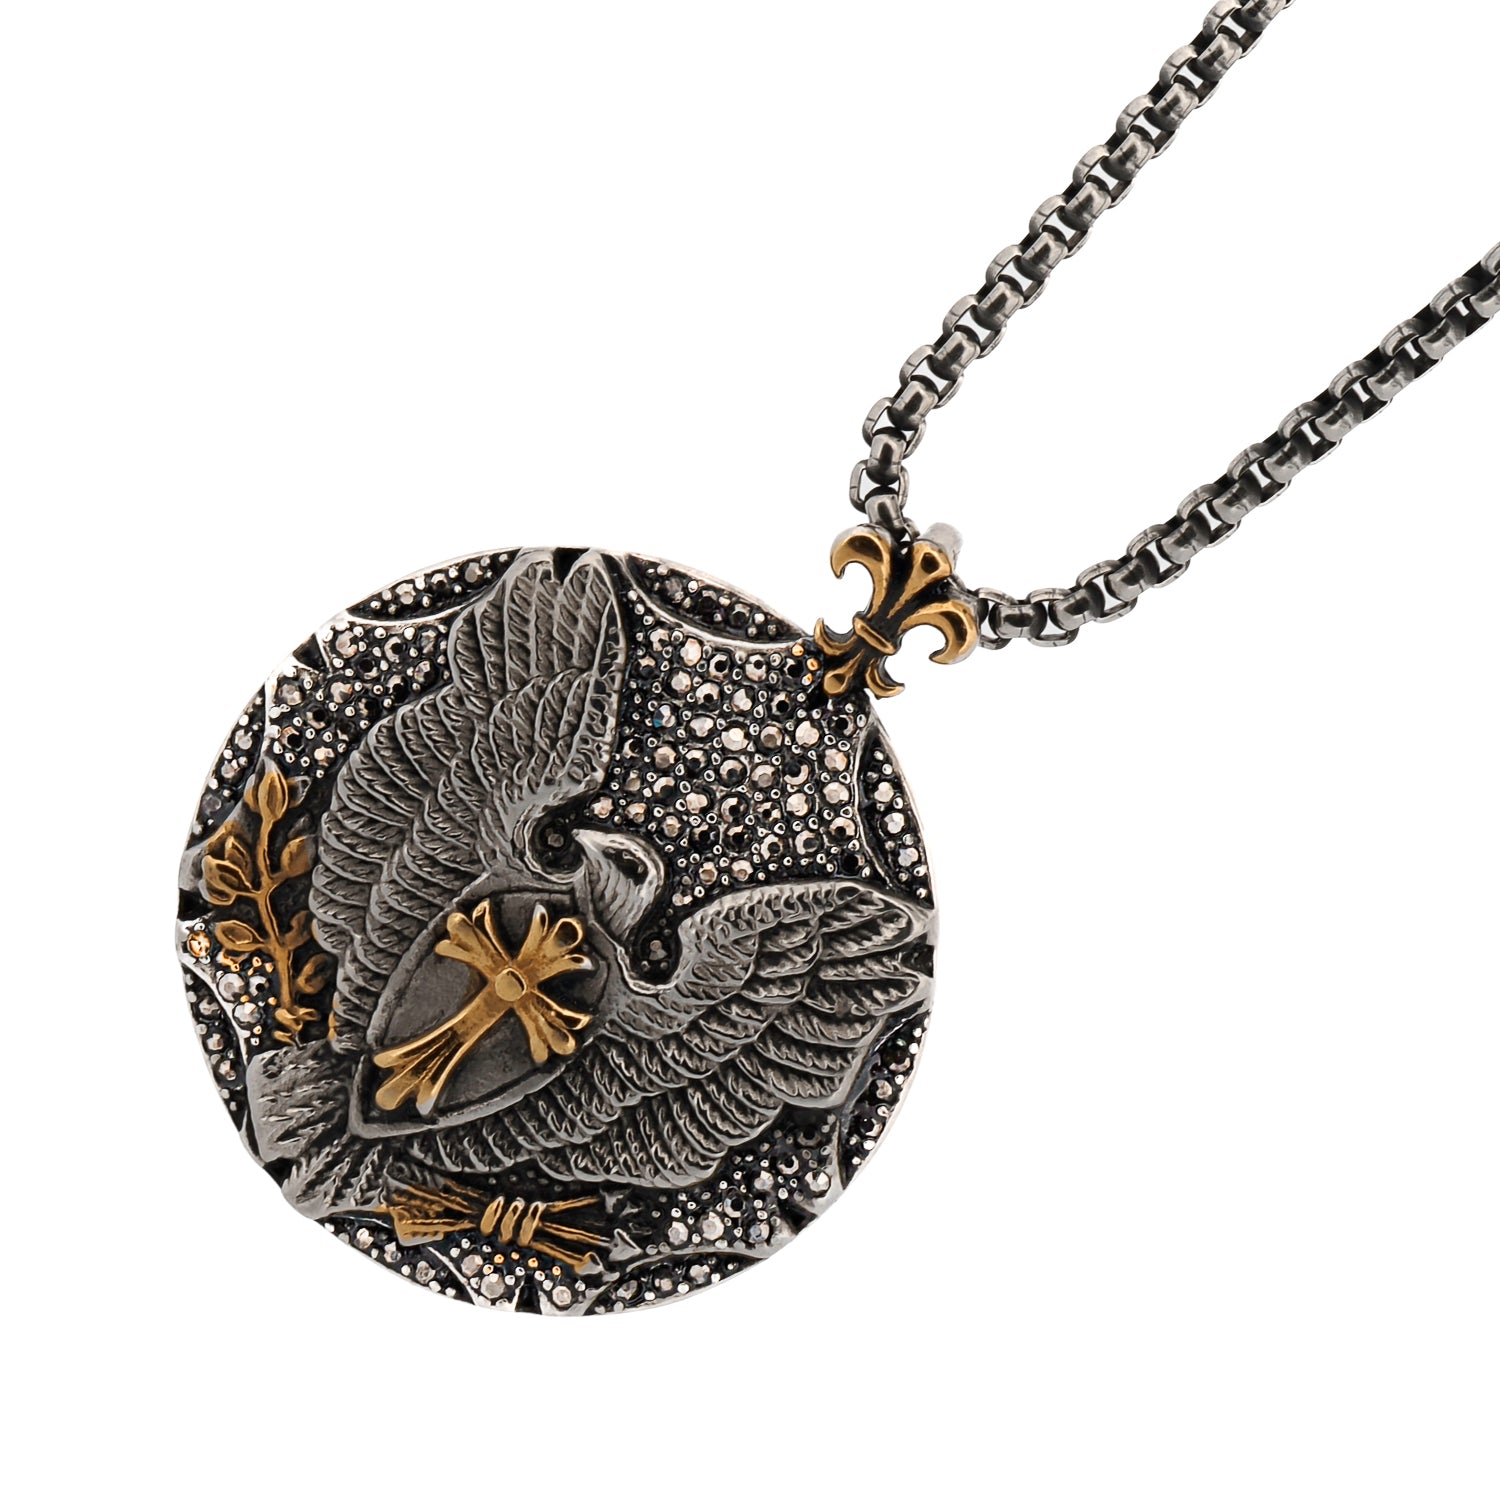 Powerful Eagle Spiritual Symbols Silver &amp; Gold Chain Necklace